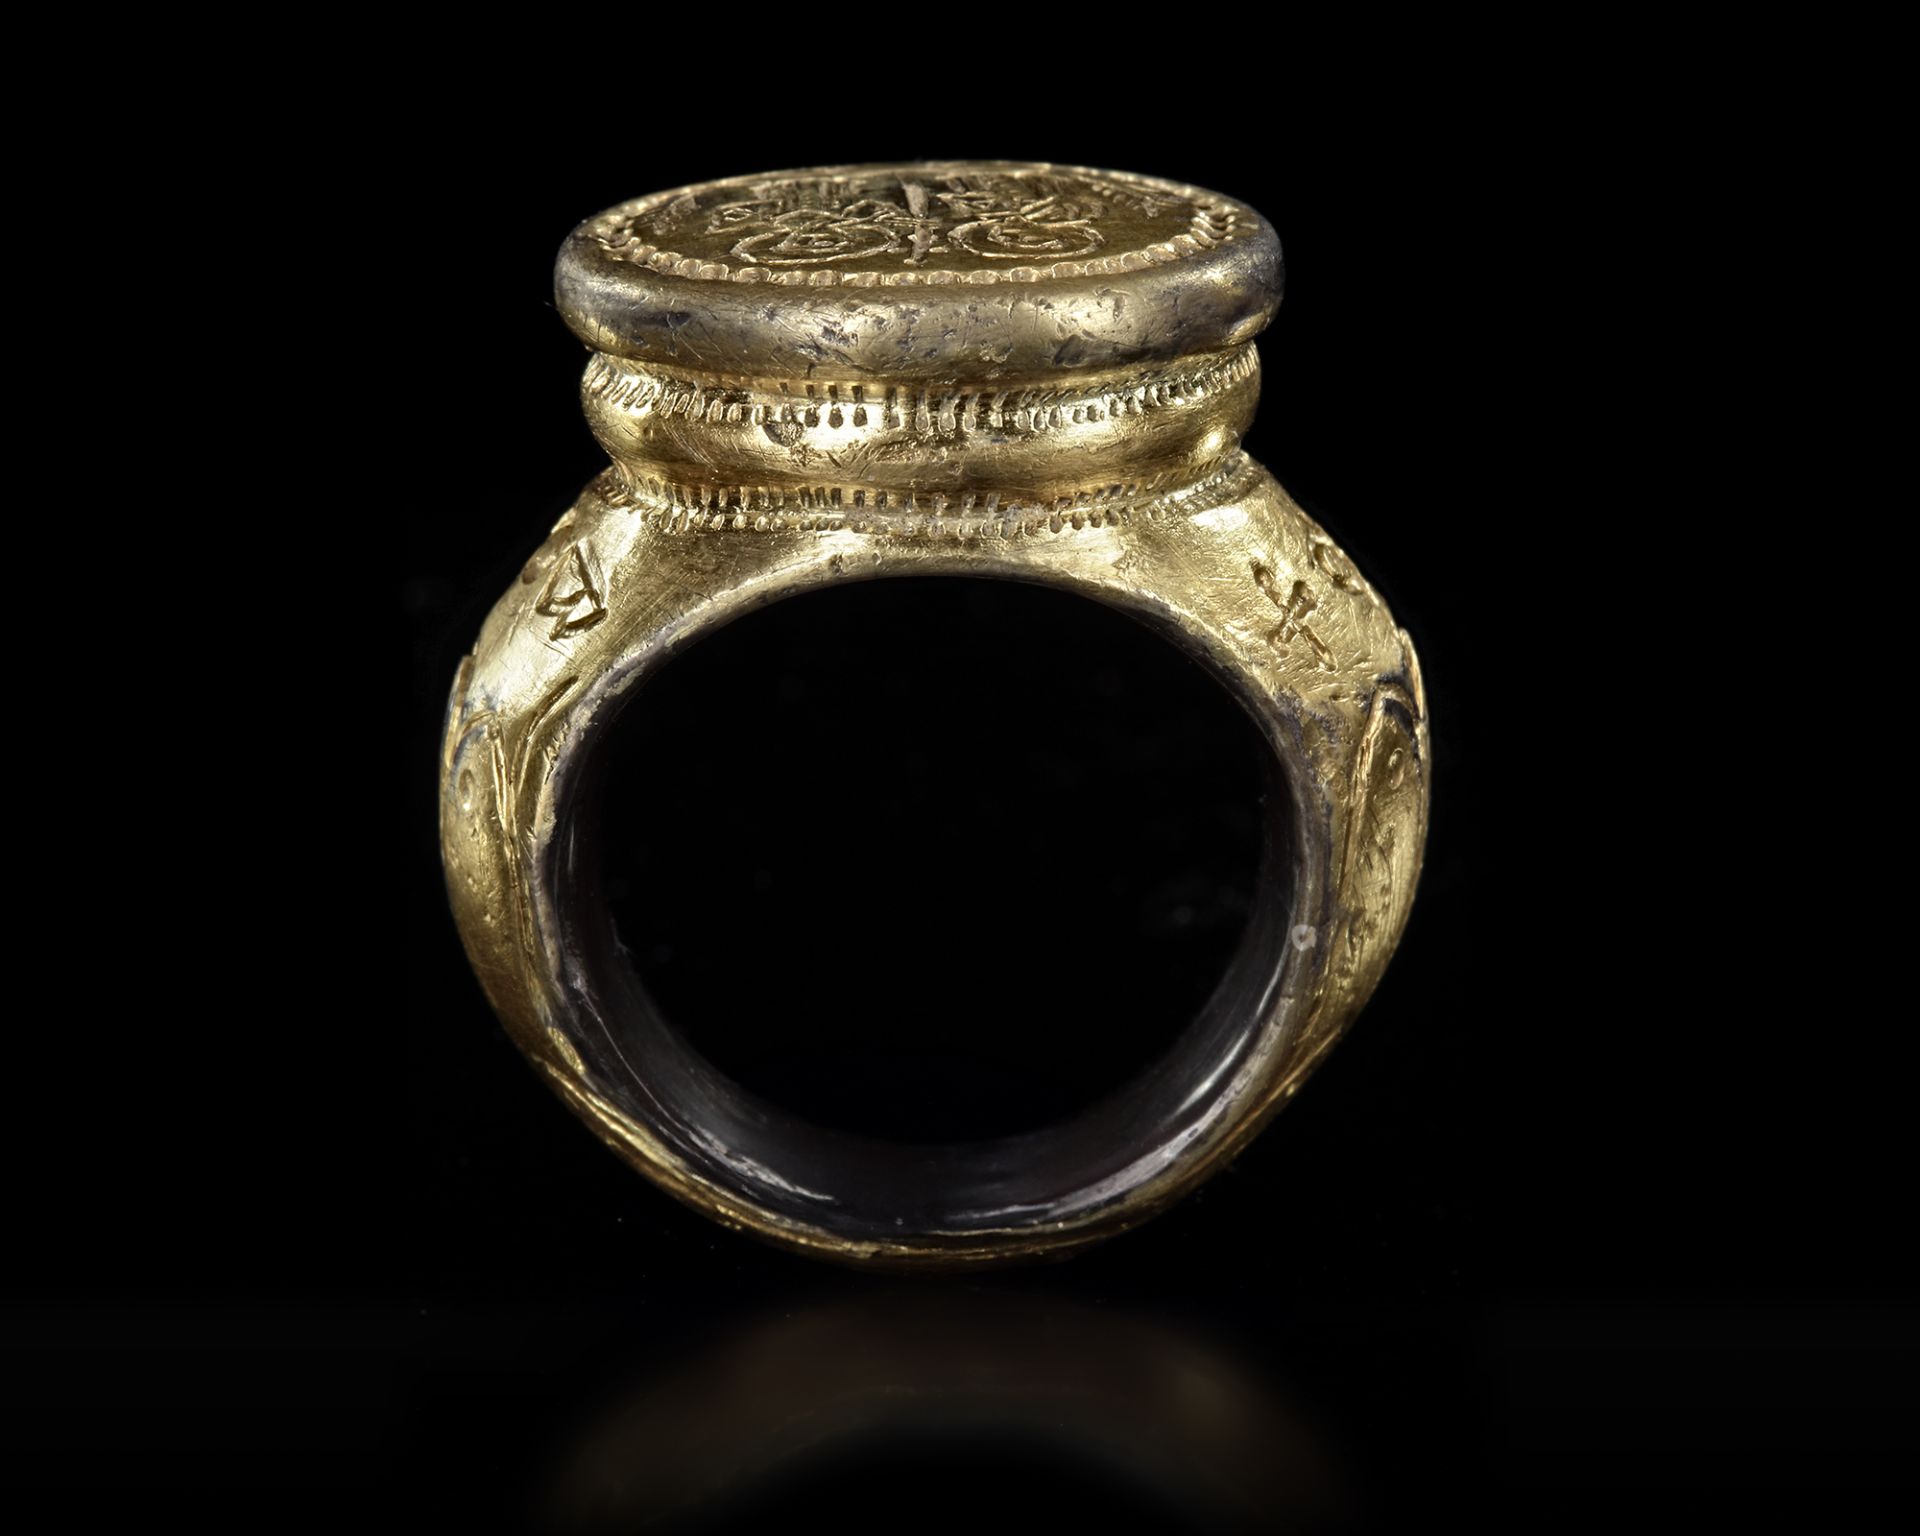 A LARGE SILVER GILT BYZANTINE RING, 8TH-10TH CENTURY AD - Image 3 of 5